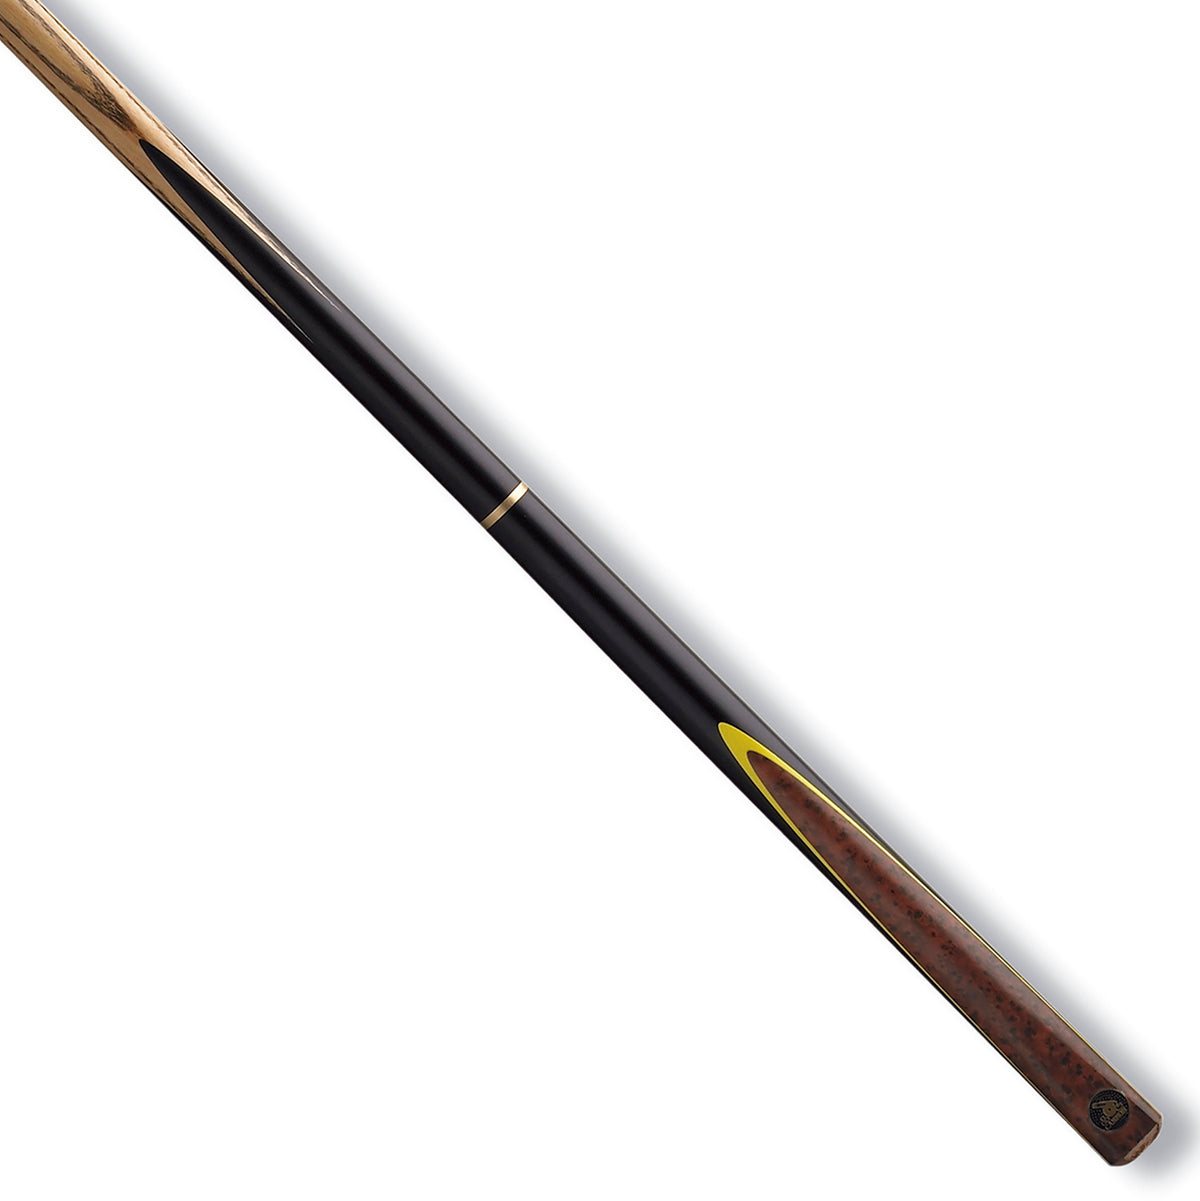 Cannon React 3/4 Jointed 8 Ball Pool Cue. On angle view